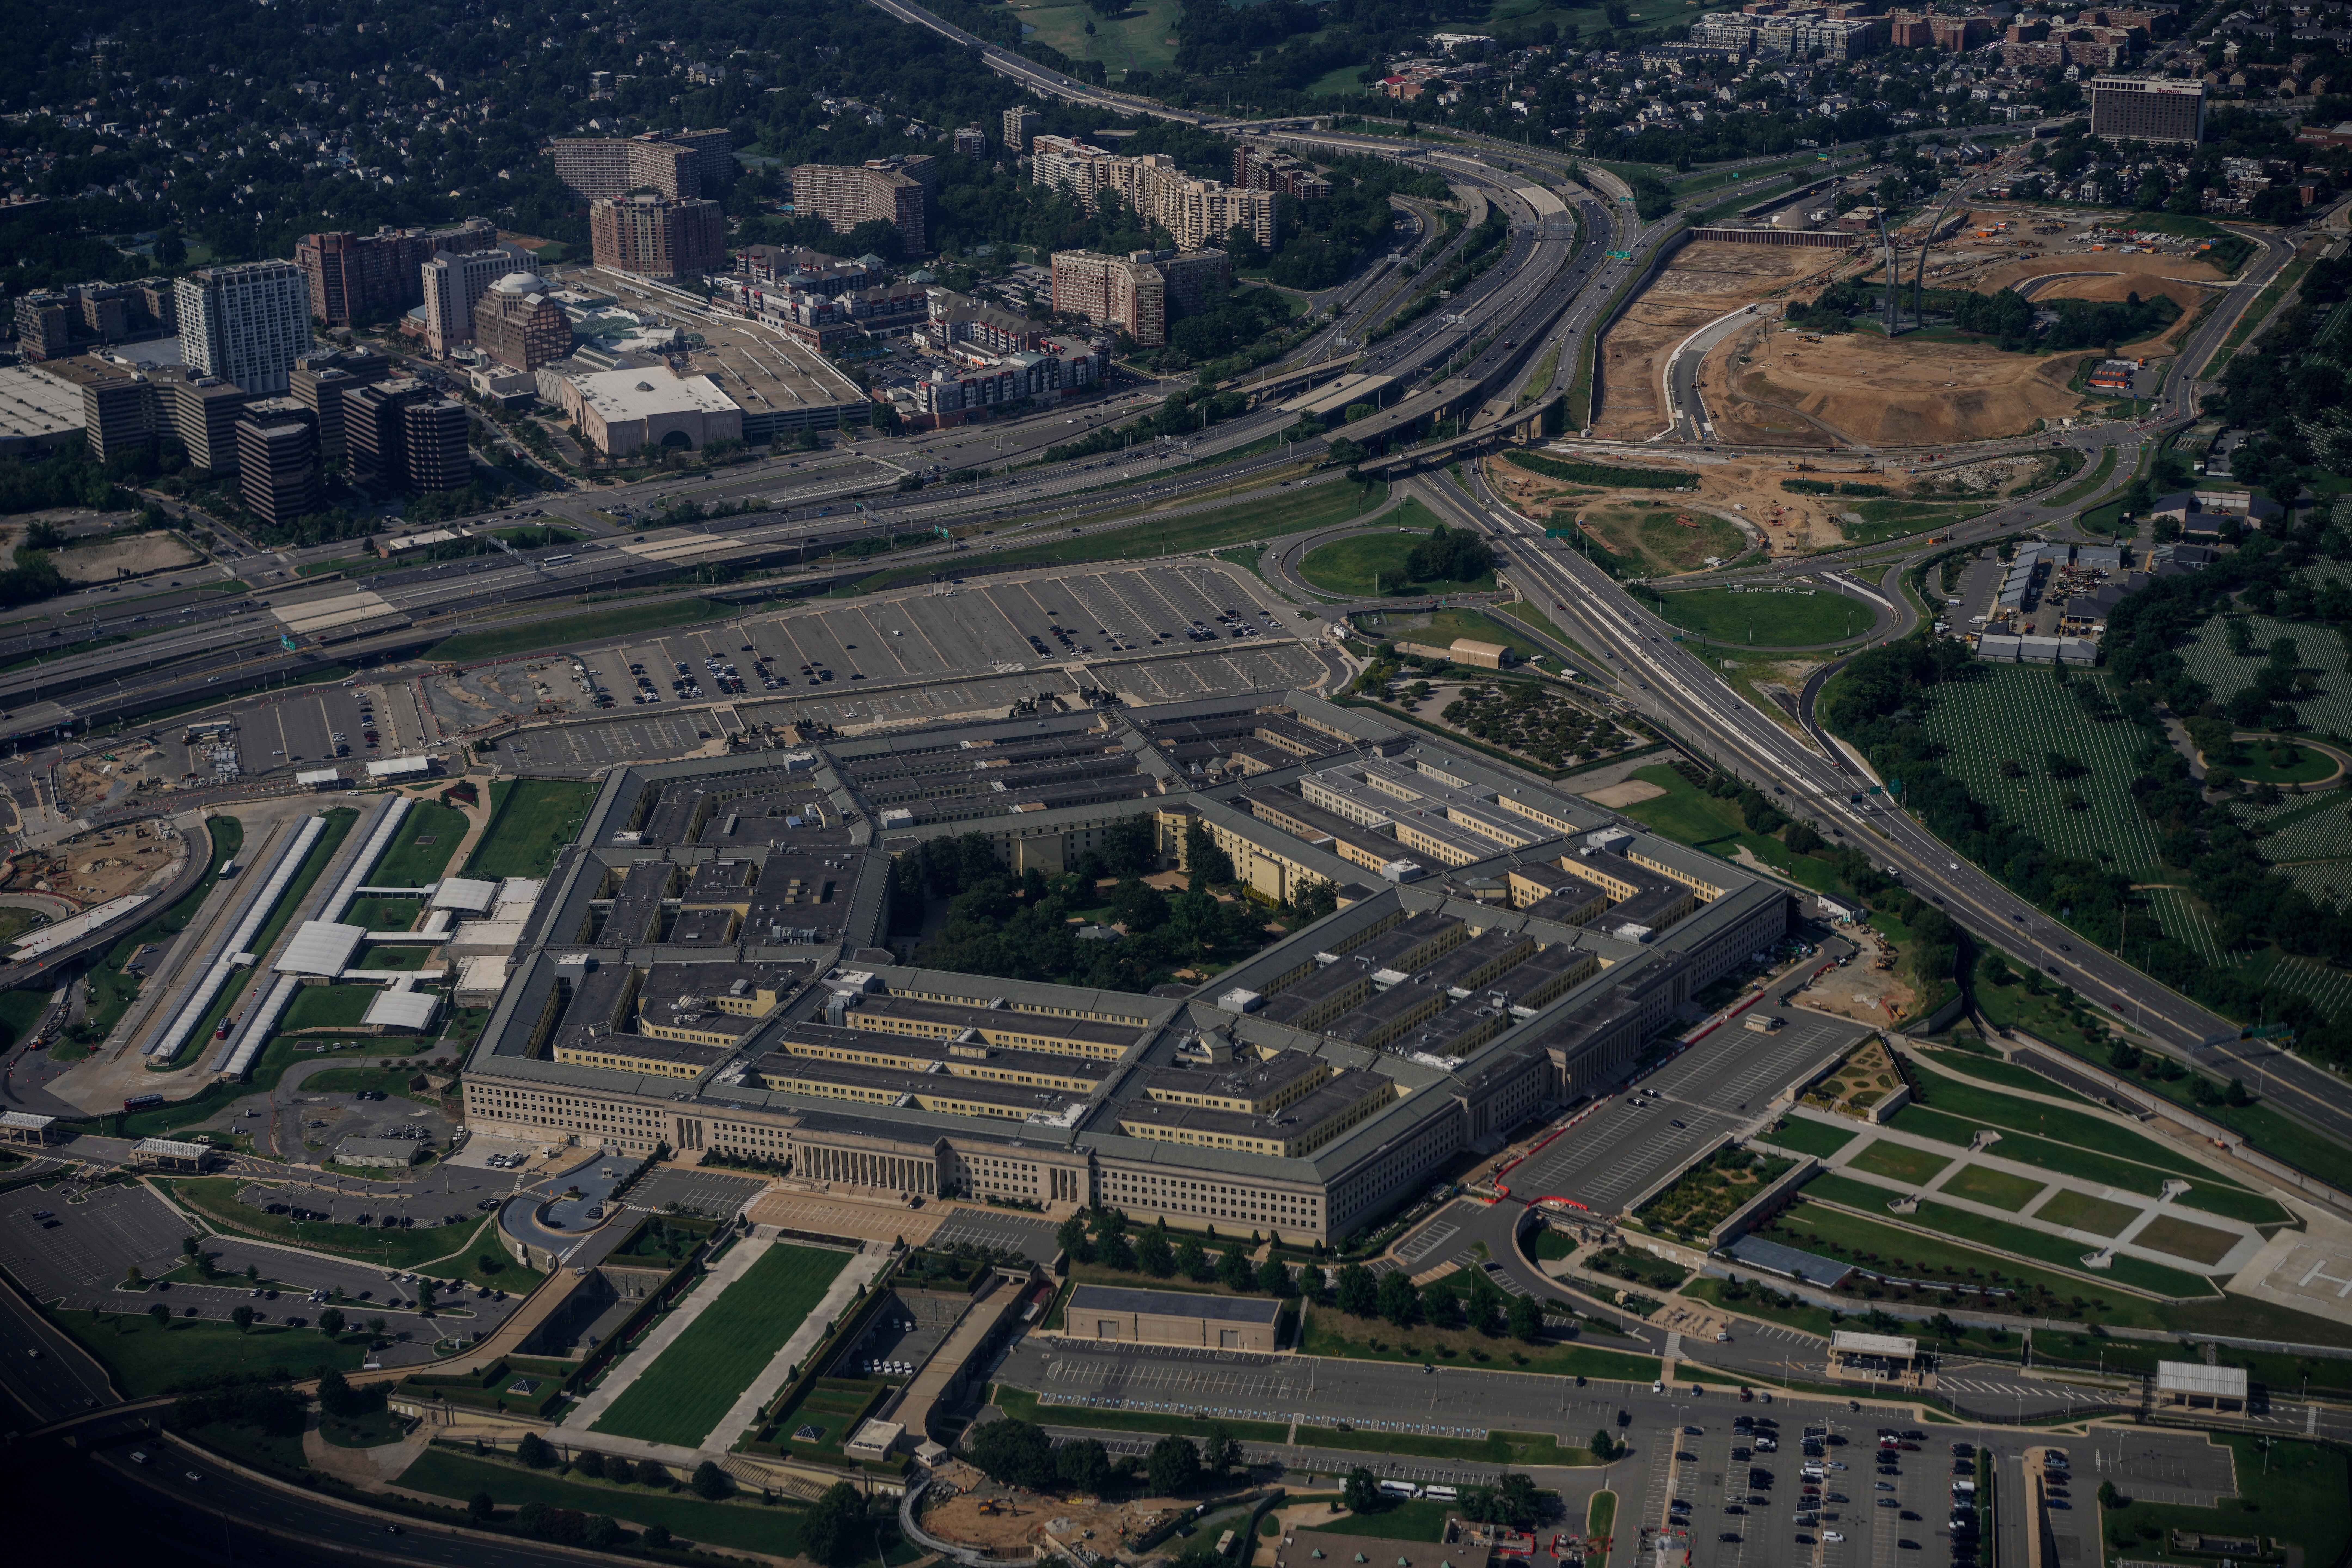 The Department of Defense is requesting $114.7 million to spend on diversity, equity, inclusion, and accessibility (DEIA) programs at the Pentagon in 2024. (AP Photo/Carolyn Kaster)